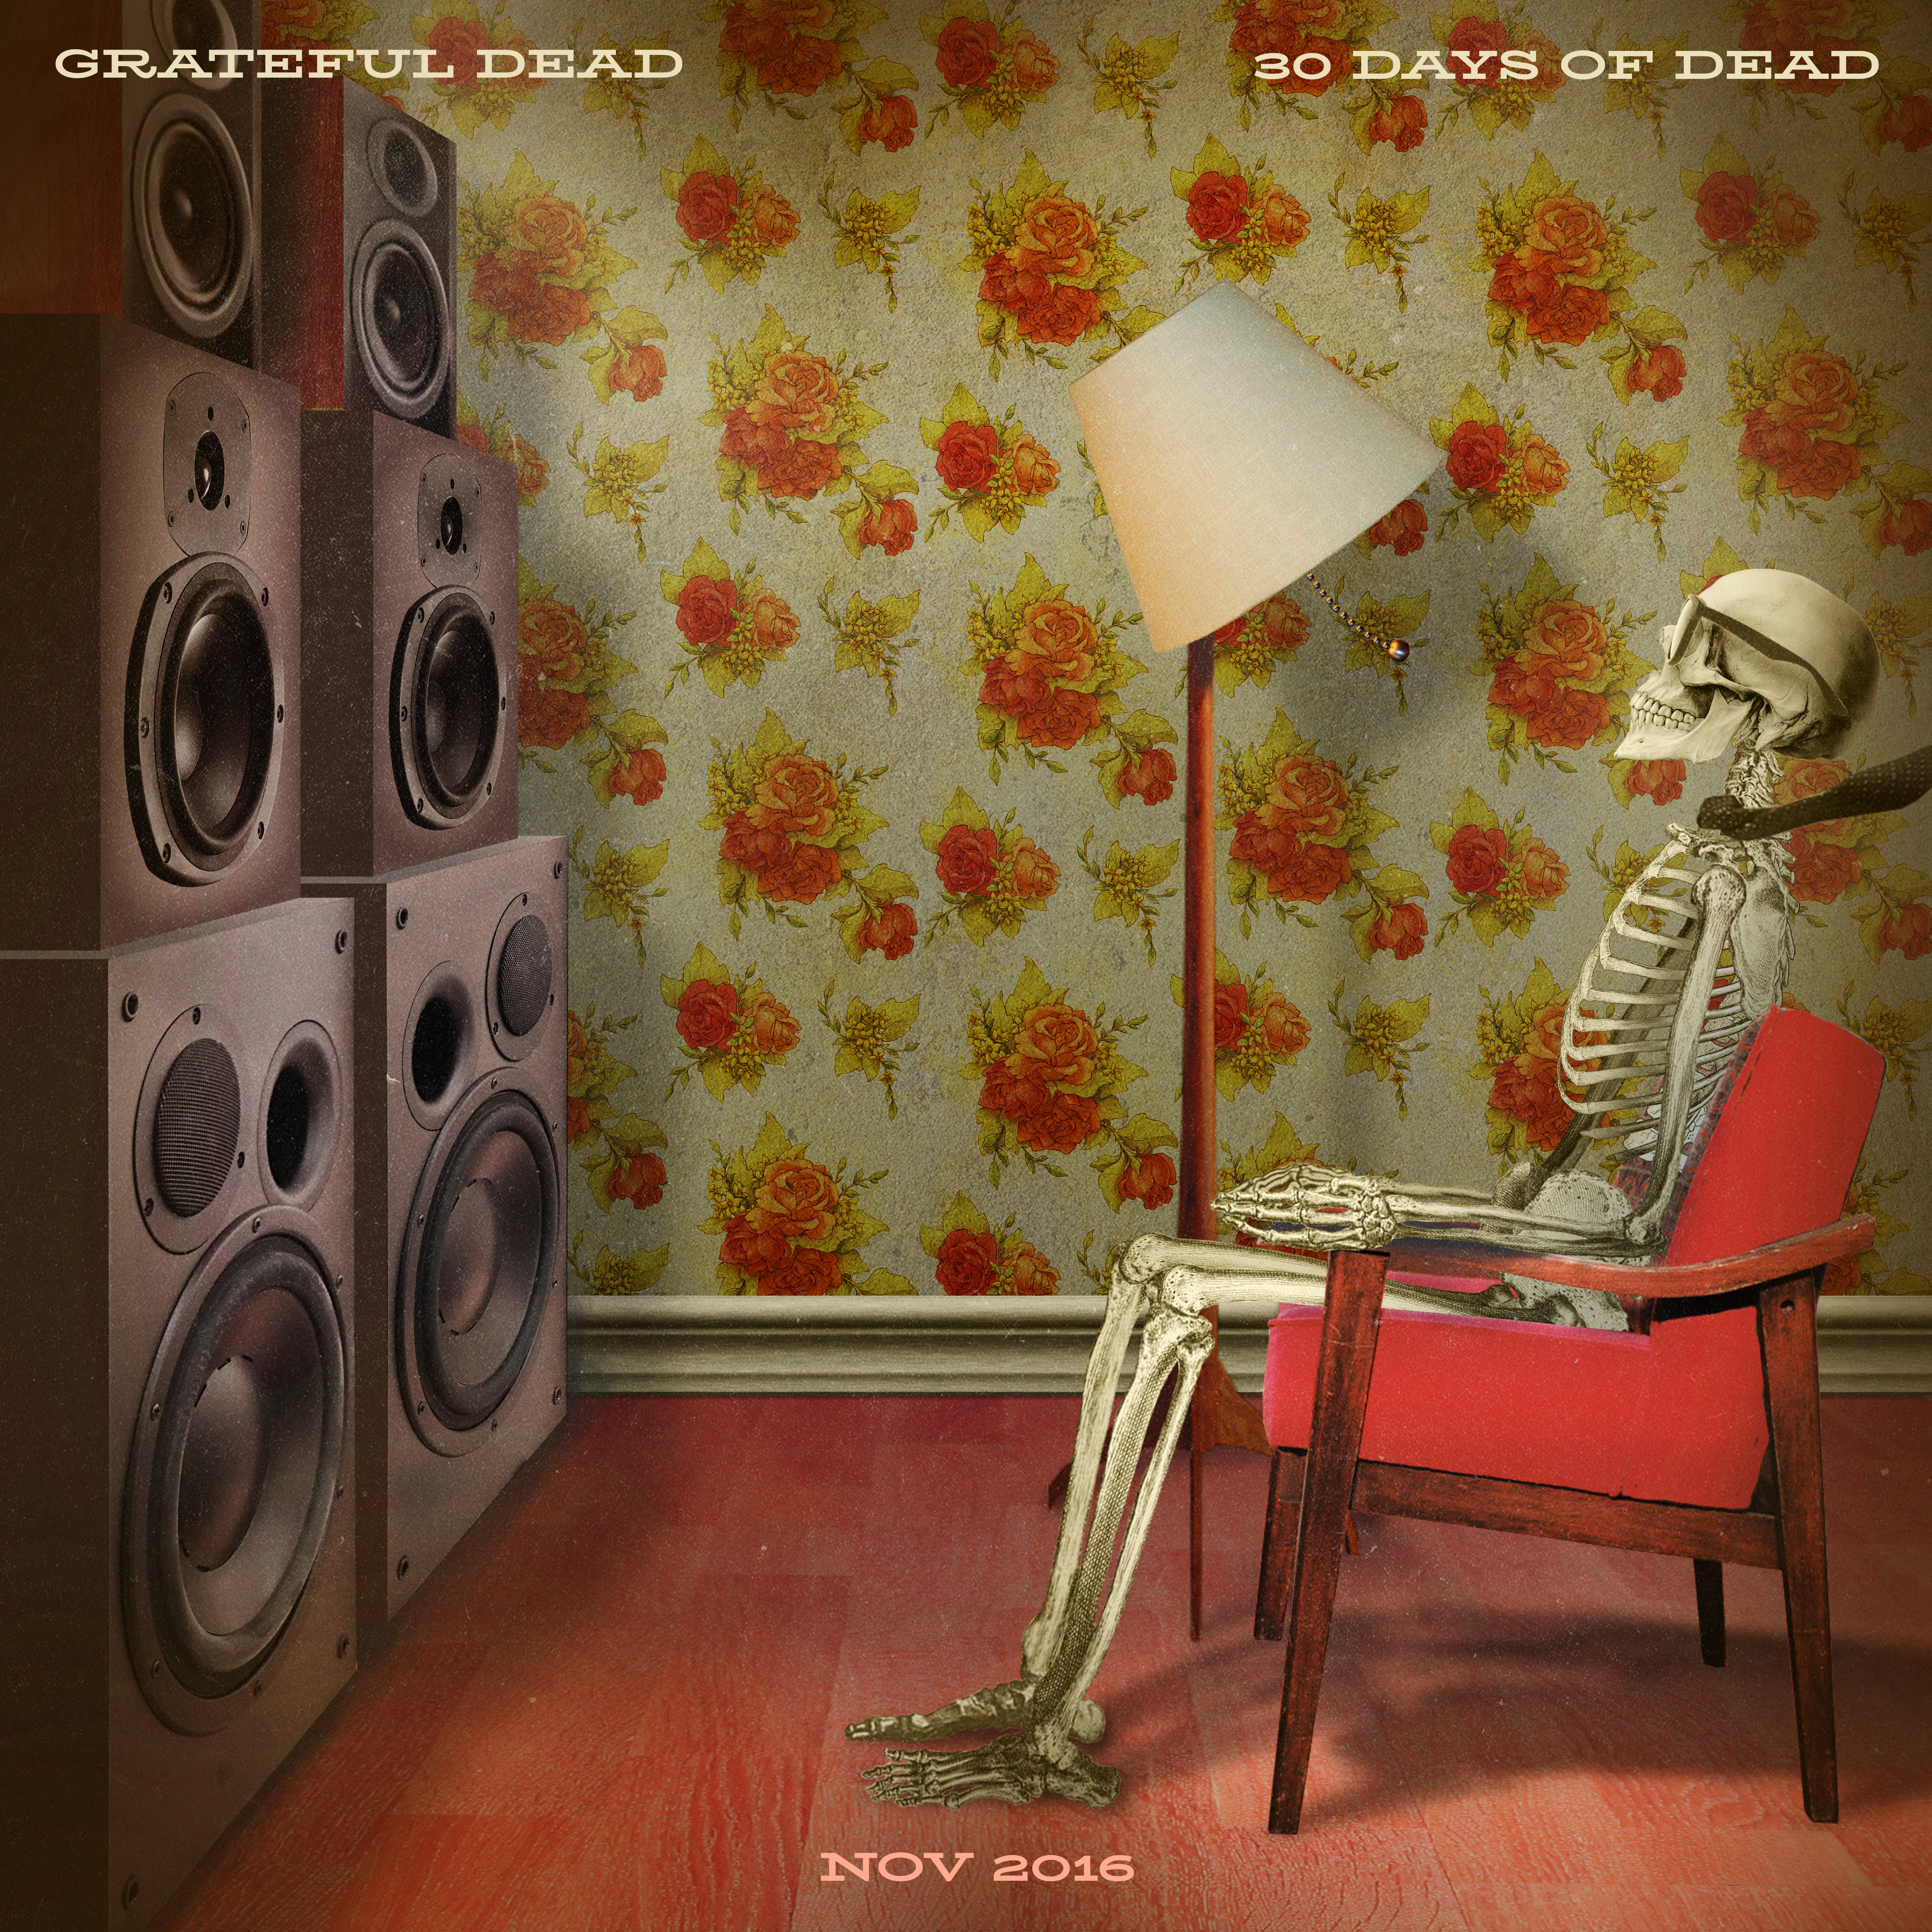 Official 2016 30 Days of Dead Cover Art